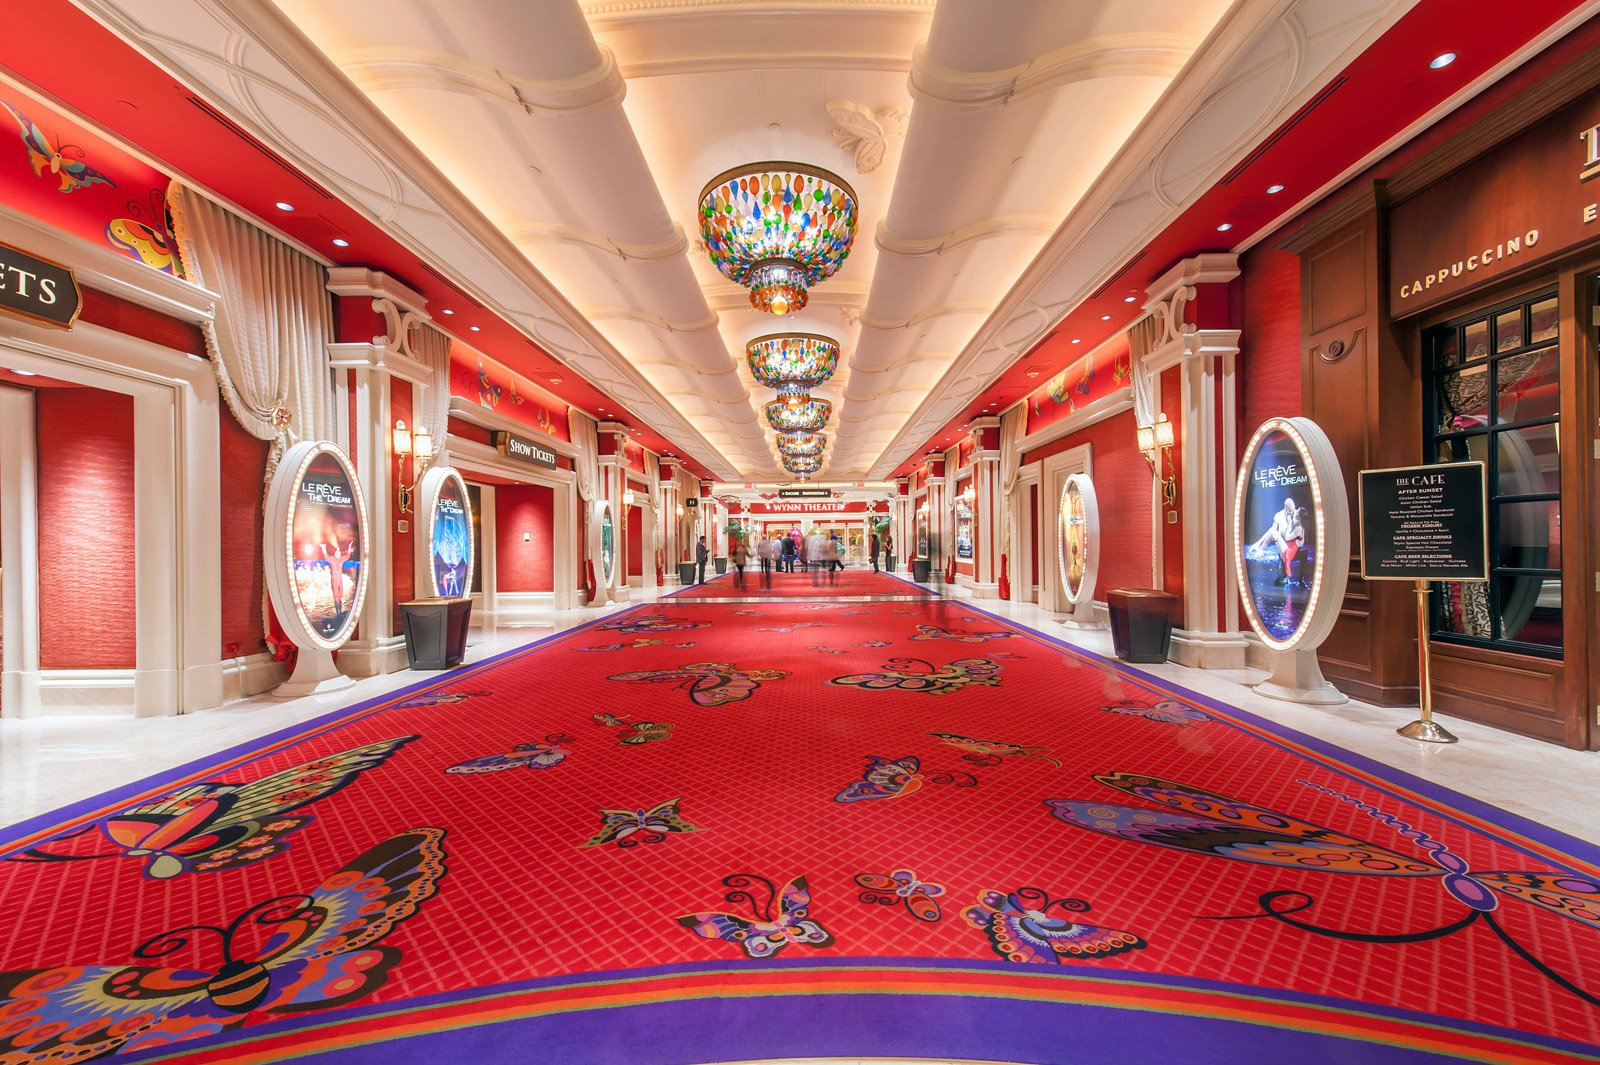 A photograph of the carpeting in a hallway of the Wynn Las Vegas hotel.